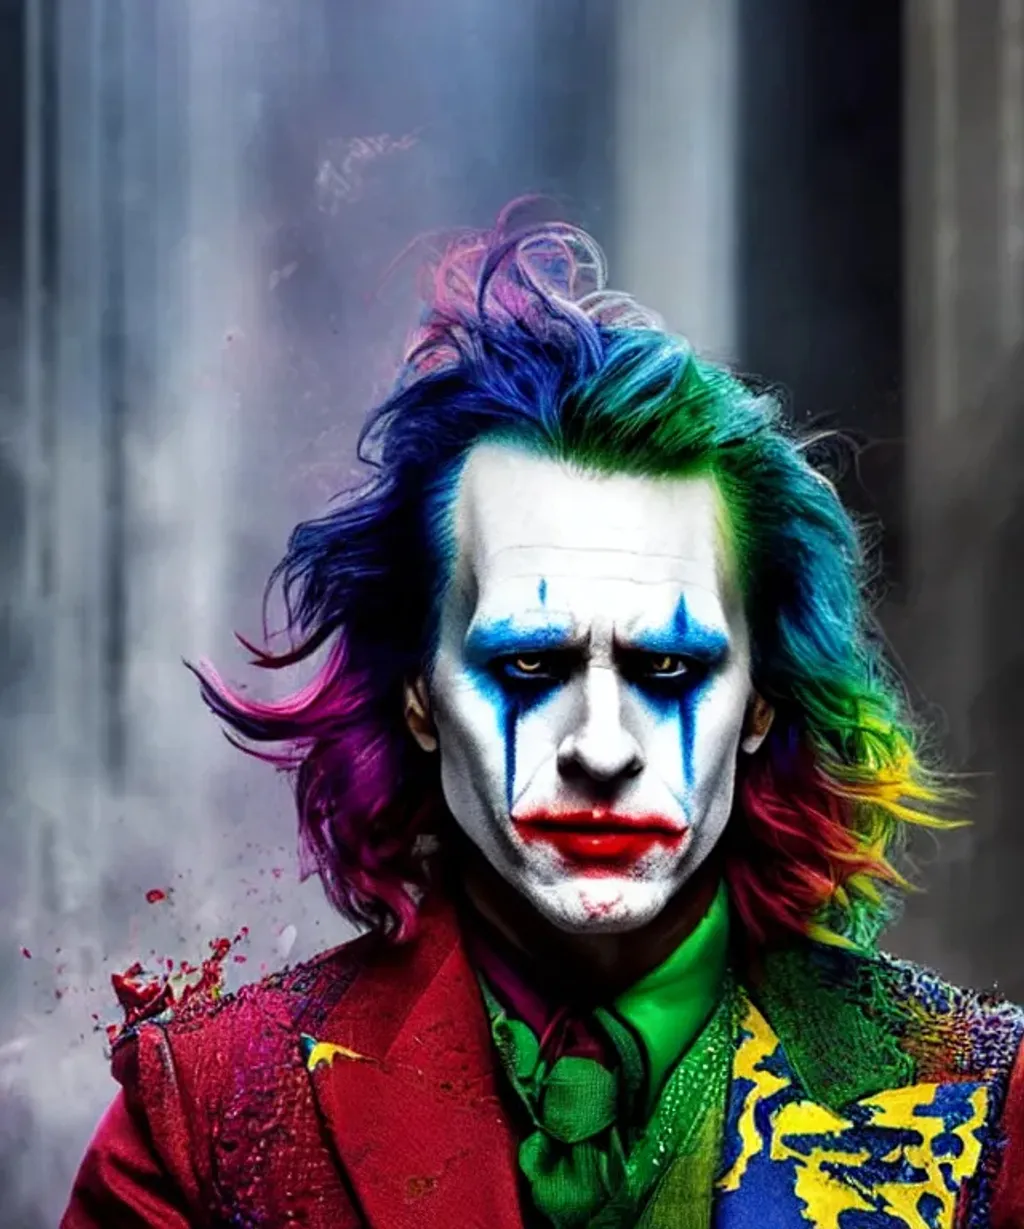 Prompt: vivid dripping colors Jered Leto as Joker, Jered Leto vivid color street level action scene low angle masterpiece, cinematic, dramatic, Artstation, by Frank Frazetta, by H.R. Giger, by Mark Brooks, Octane render, Unreal Engine, by Wētā FX, by WLOP, Filmic, Photography, Photoshoot, Ultra-Wide Angle, Depth of Field, DOF, F/2.8, 5-Dimensional, Everdimensional, Alldimensional, 8K, 32k, Megapixel, CMYK, Adobe RGB, HSV, ProPhoto RGB, Rim Lights, Marquee, Stroboscope, OLED, AMOLED, Quantum Dot Display, Global Illumination, Ray Tracing Global Illumination, Ambient Occlusion, Translucidluminescence, Shadows, Chromatic, Prismatic, Lumen Reflections, Parallax, Quantization, Edge Detection, Textured, Convolution Matrix, Harris Shutter, FXAA, Post Processing, SFX, insanely detailed and intricate, hypermaximalist, elegant, ornate, hyper realistic, super detailed, poster, sharp focus, hyperrealism, insanely detailed, lush detail, filigree, intricate, crystalline, perfectionism, max detail, 4k uhd, spirals, tendrils, ornate, HQ, hard edge, breathtaking, mdjrny-v4 style, highly detailed, tarot card, symmetry, character design, professional